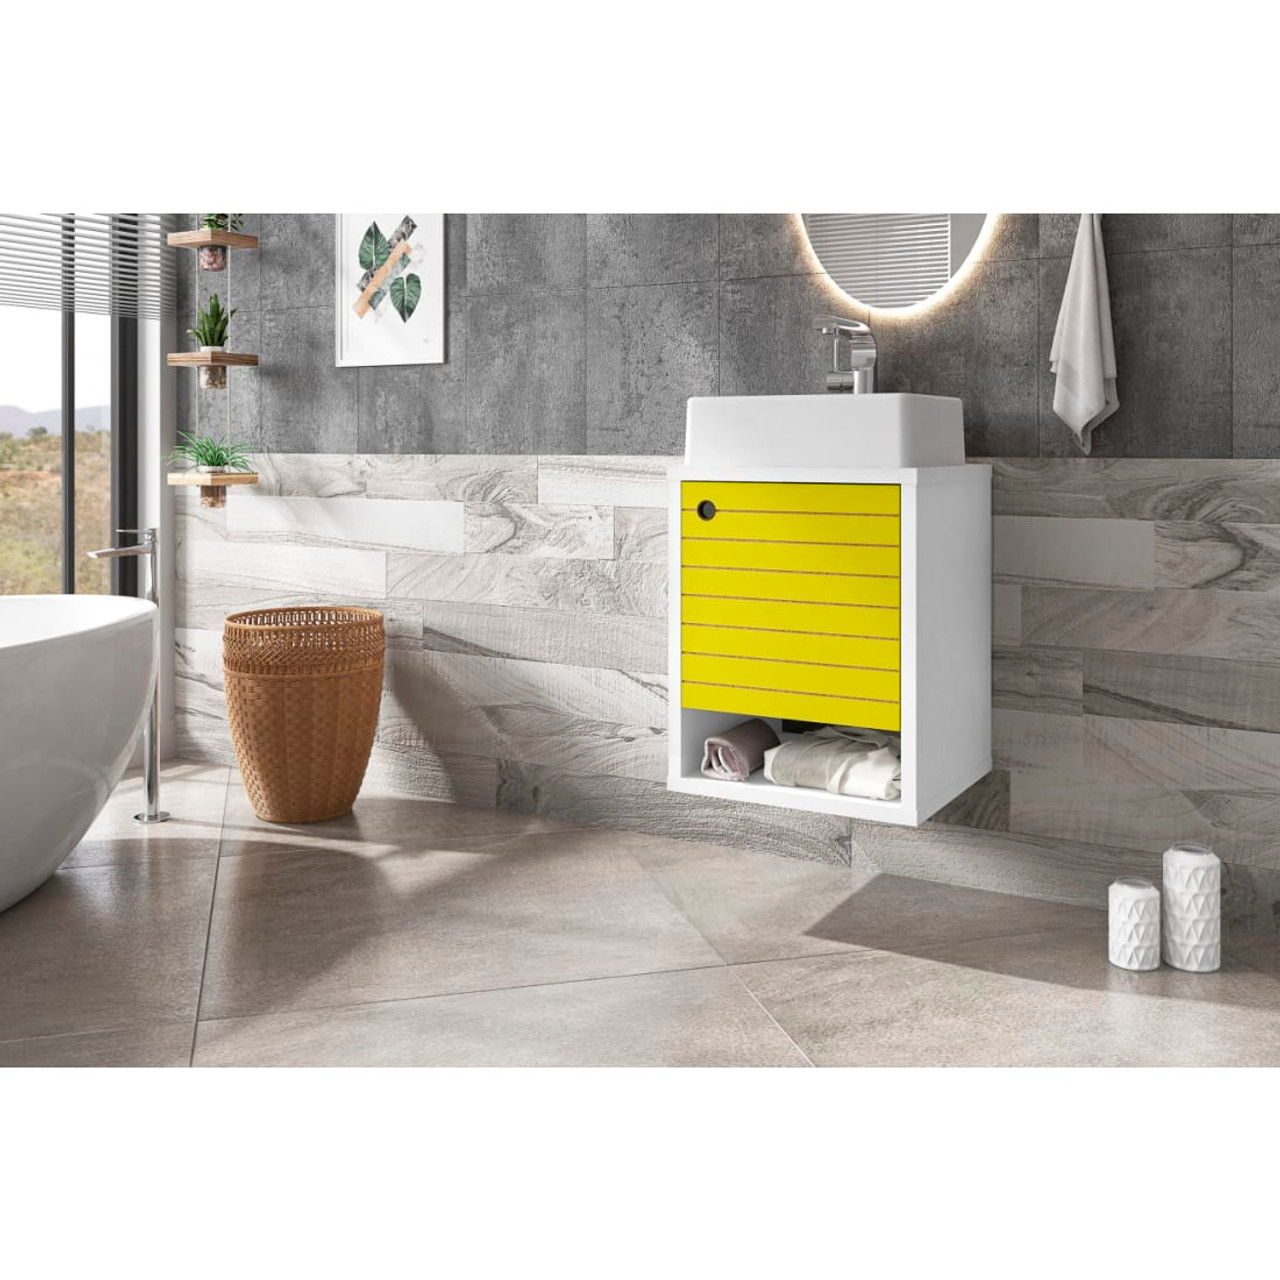 Liberty Floating 17.71” Bathroom Vanity Sink in White and Yellow